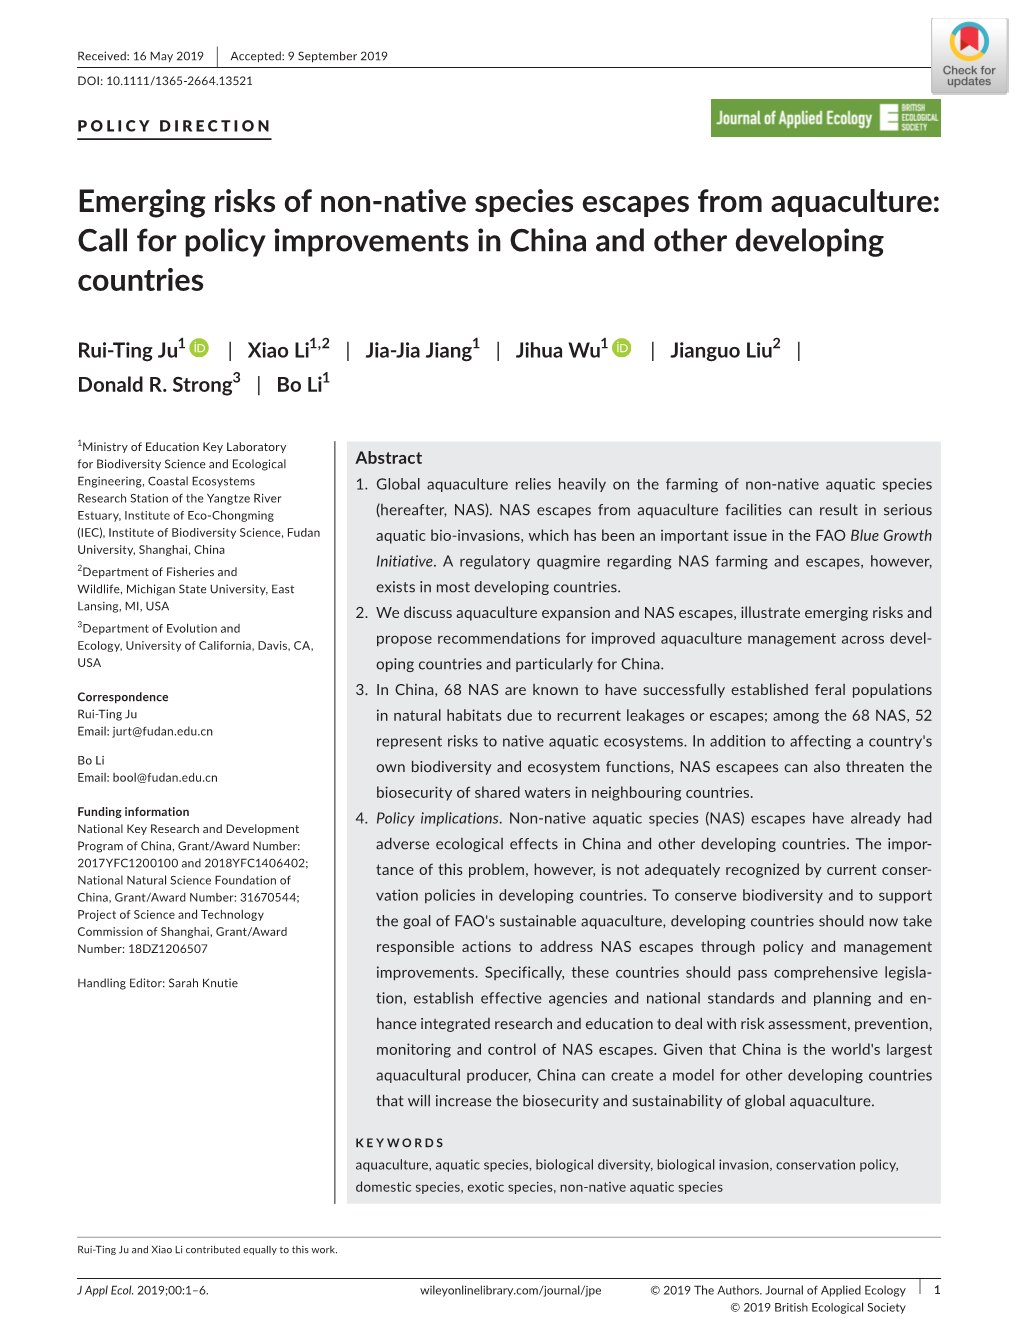 Emerging Risks of Non‐Native Species Escapes from Aquaculture: Call for Policy Improvements in China and Other Developing Countries